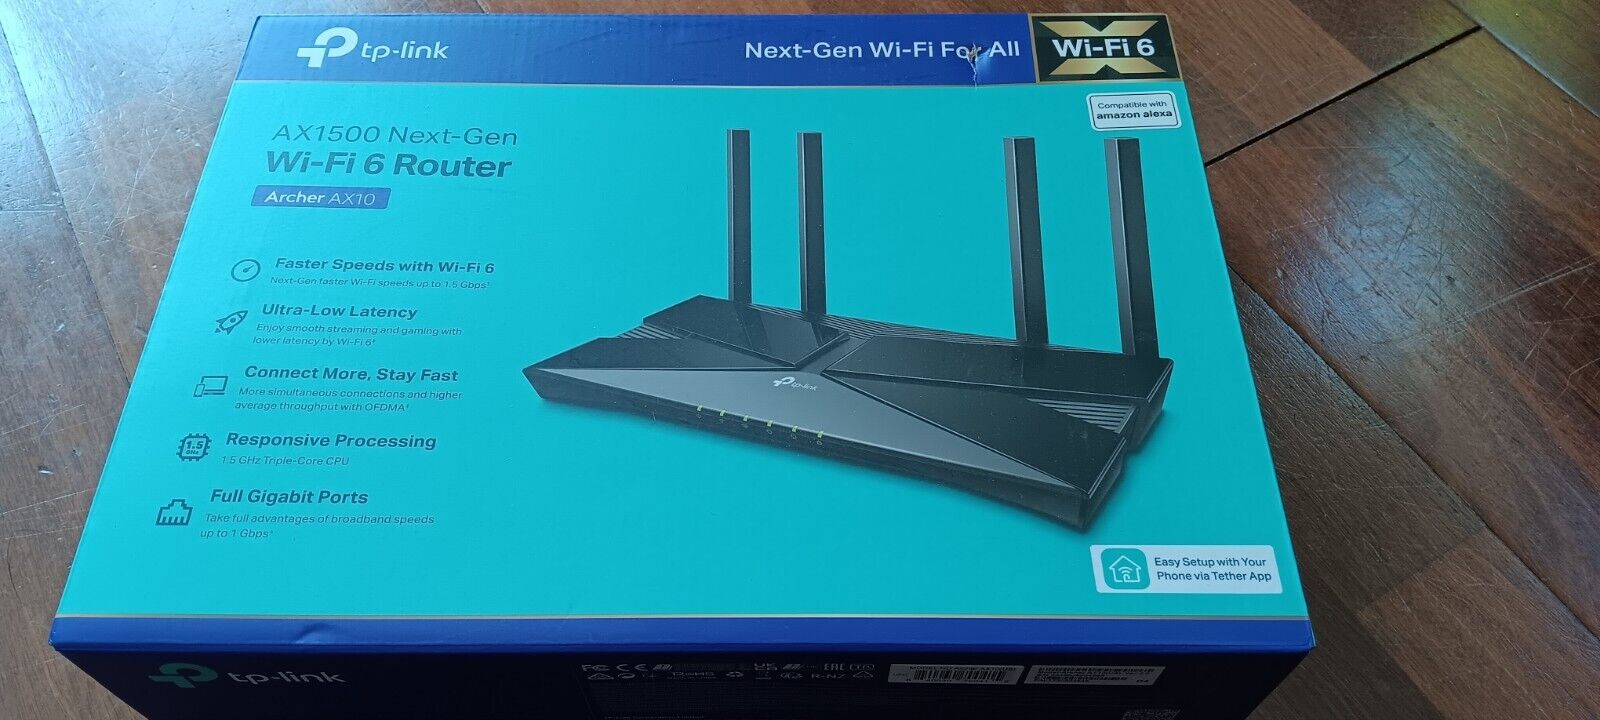 TP-LINK Archer AX10 Dual-Band Wi-Fi 6 Router AX1500 Next-Gen / New- Open Box